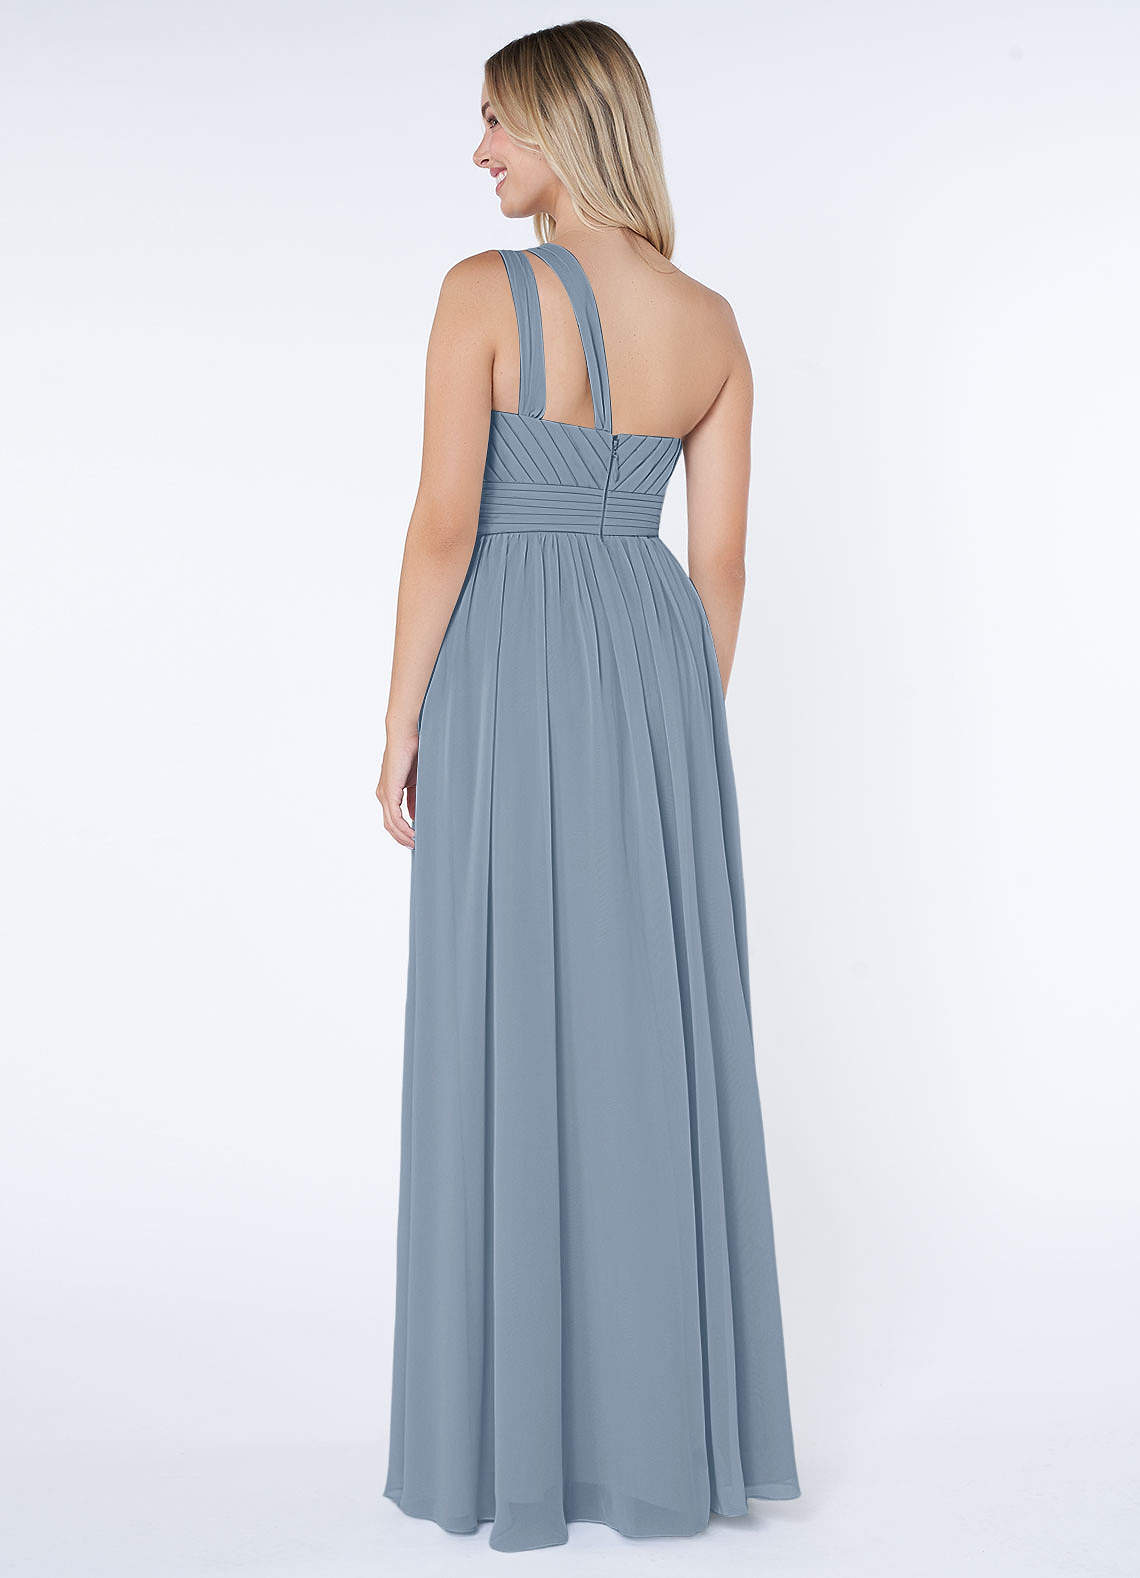 35 Blue Bridesmaid Dresses for Every Style